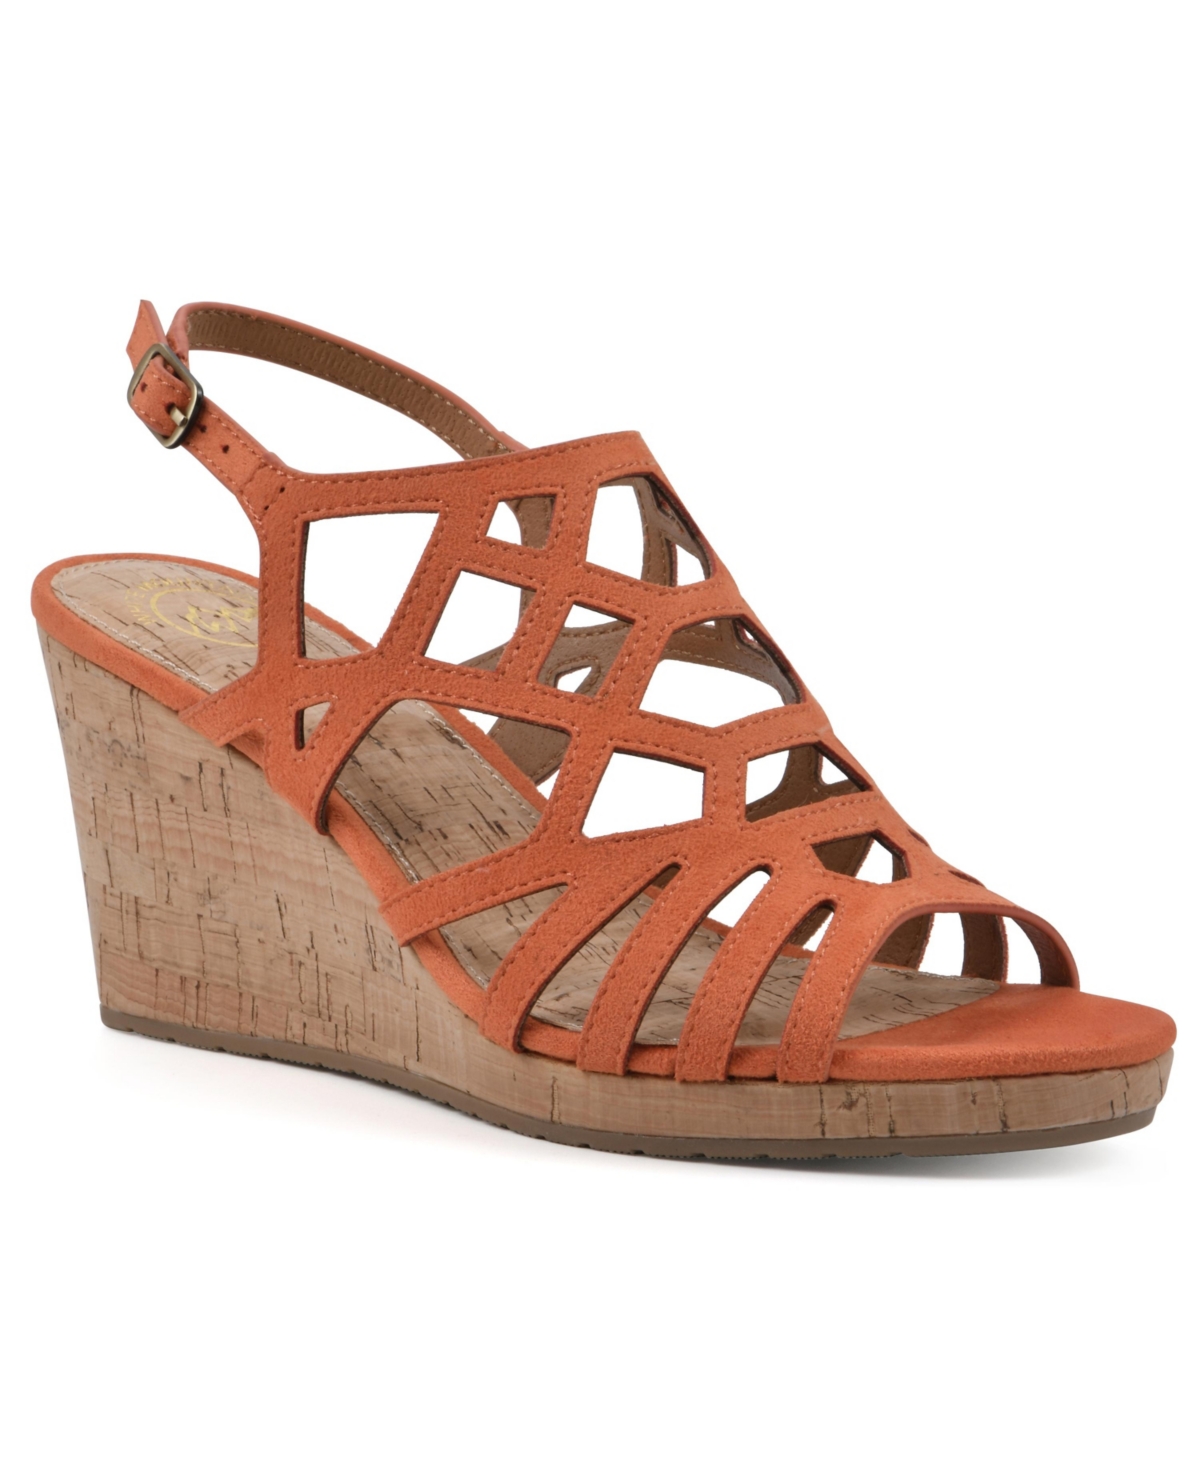 White Mountain Flaming Wedge Sandals In Aperol Spritz Fabric